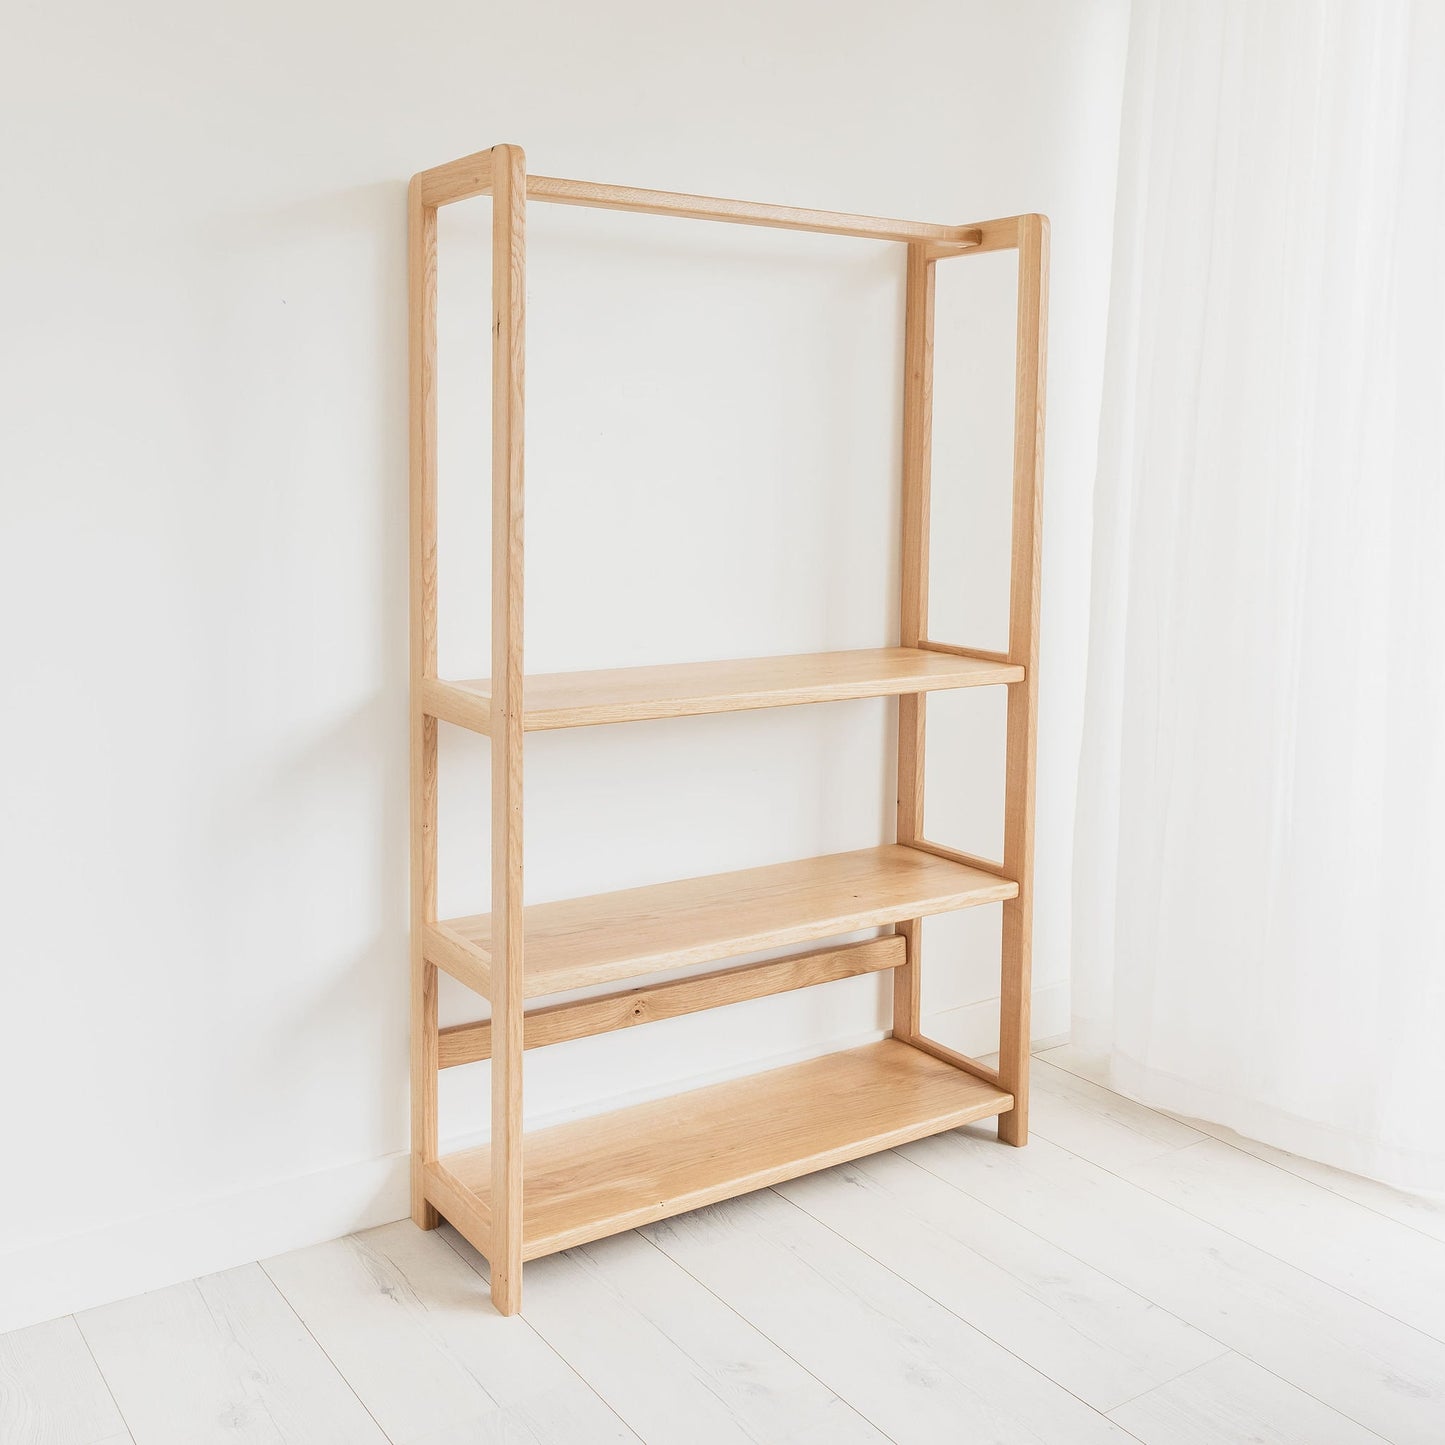 Solid Oak Shelving Unit Bookcase. Bespoke Handcrafted Home, Living and Office Furniture Hand Made In Bristol.